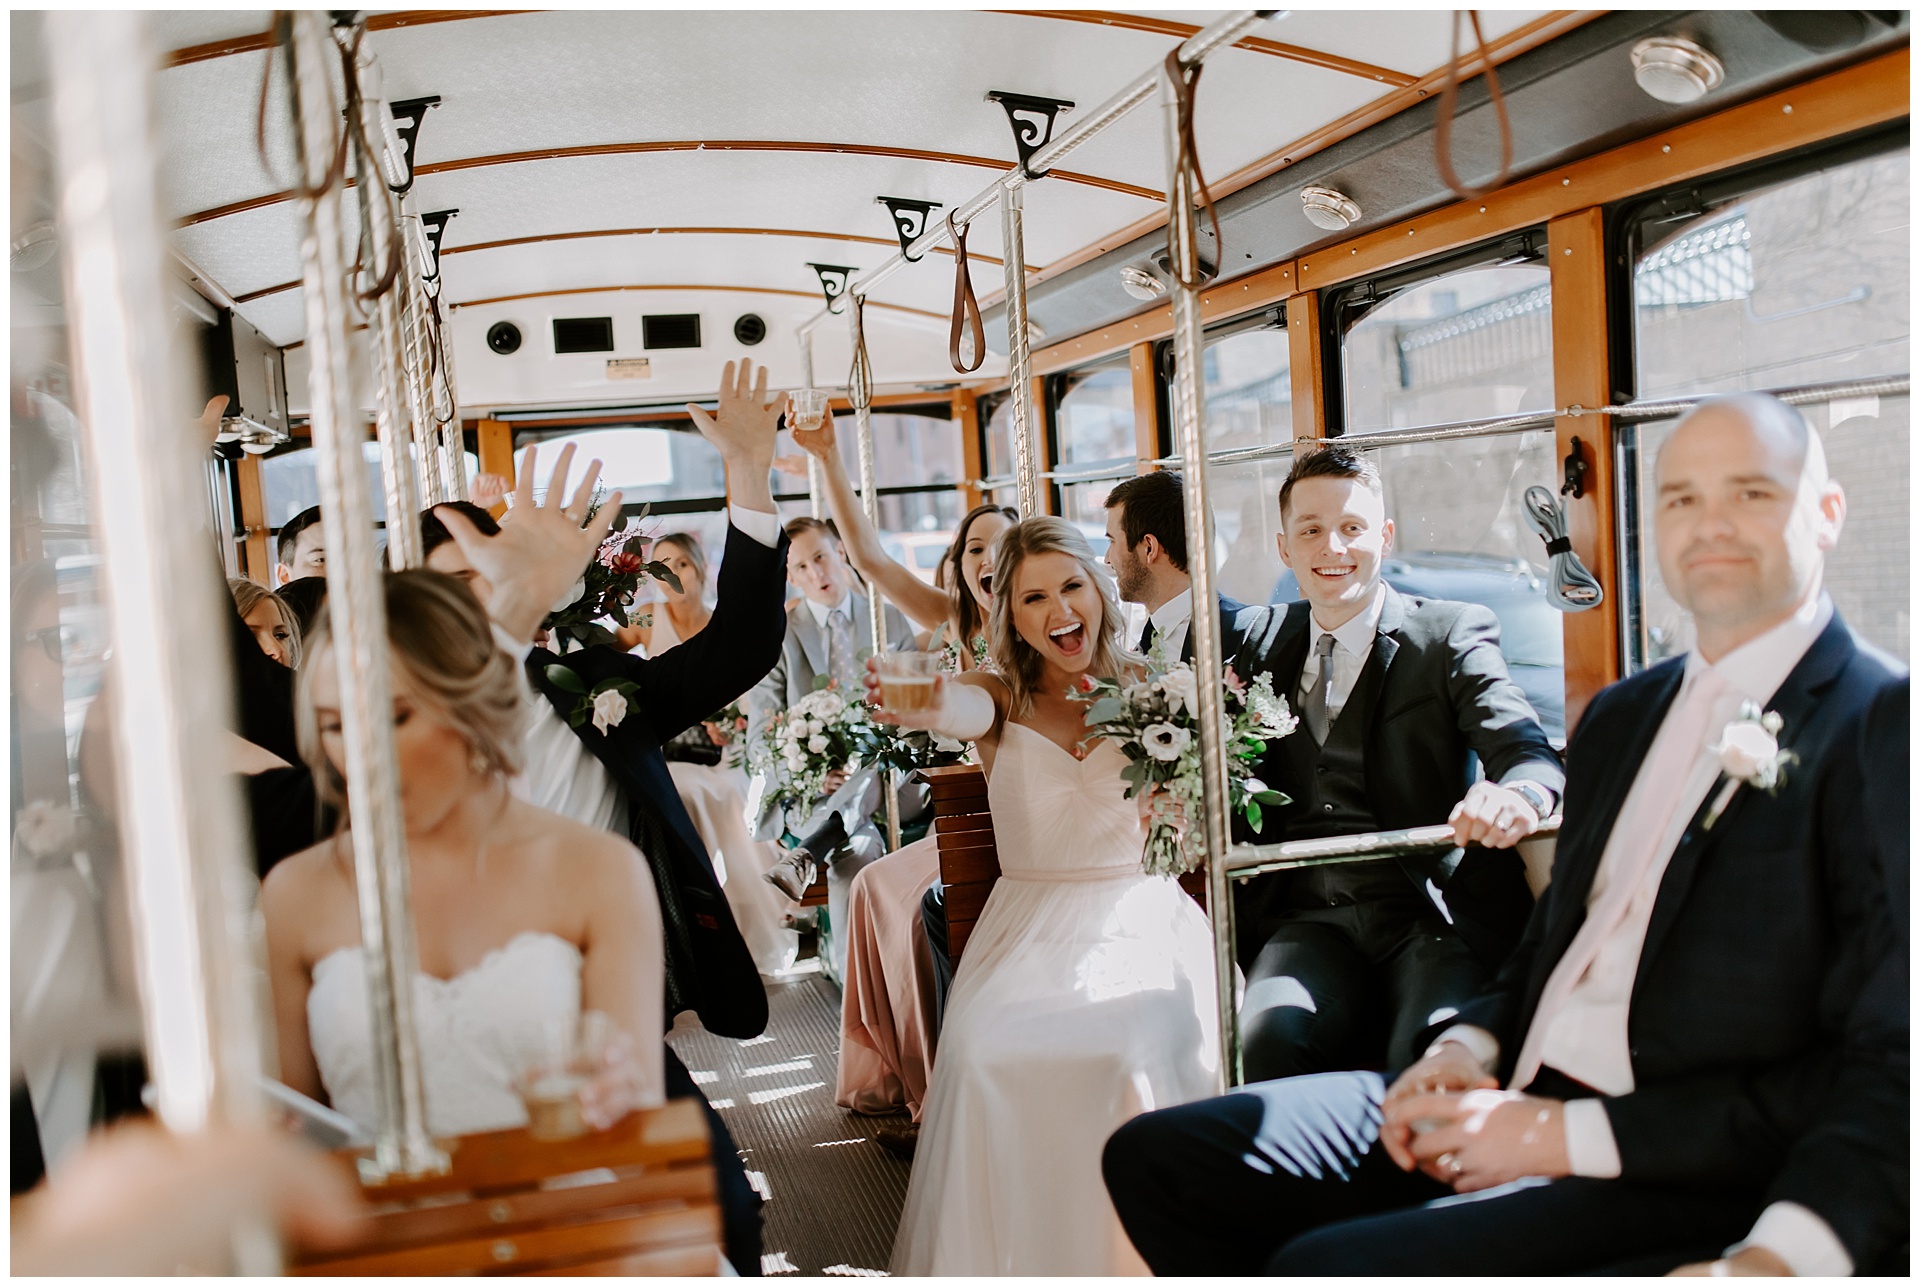 Bridesmaid celebrating on a party bus 